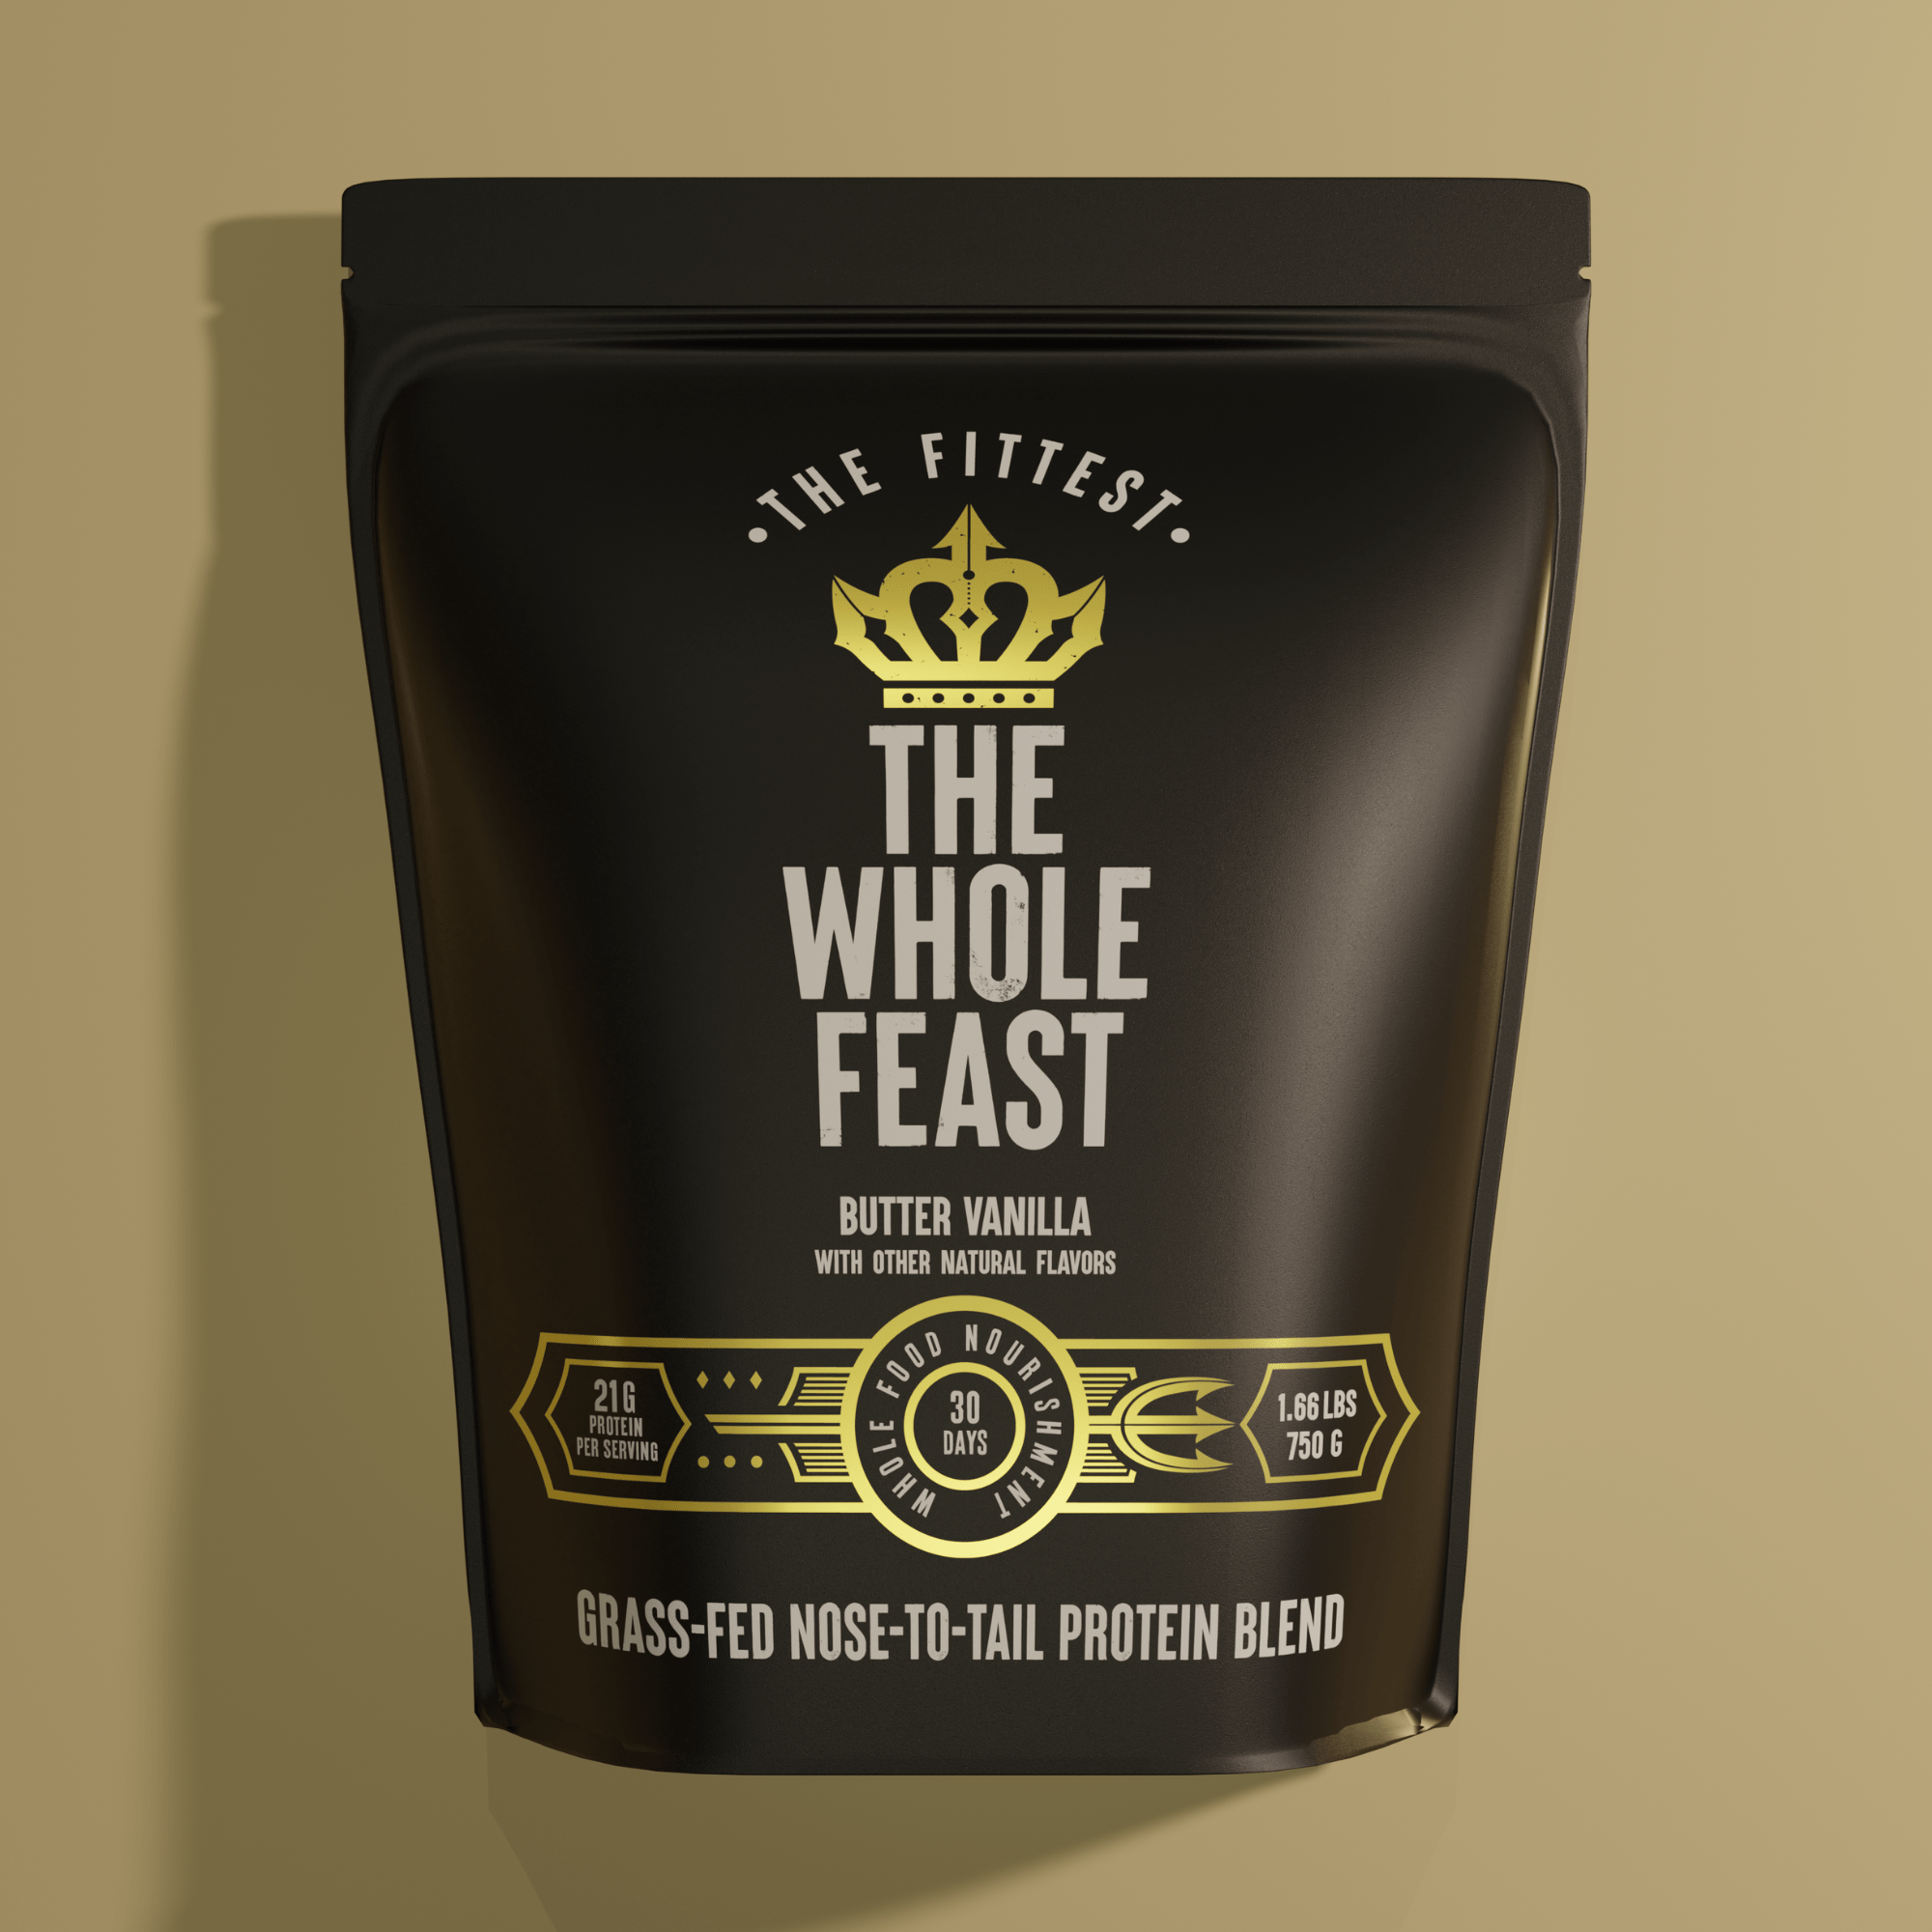 whole feast vanilla bag in front of a light gold background